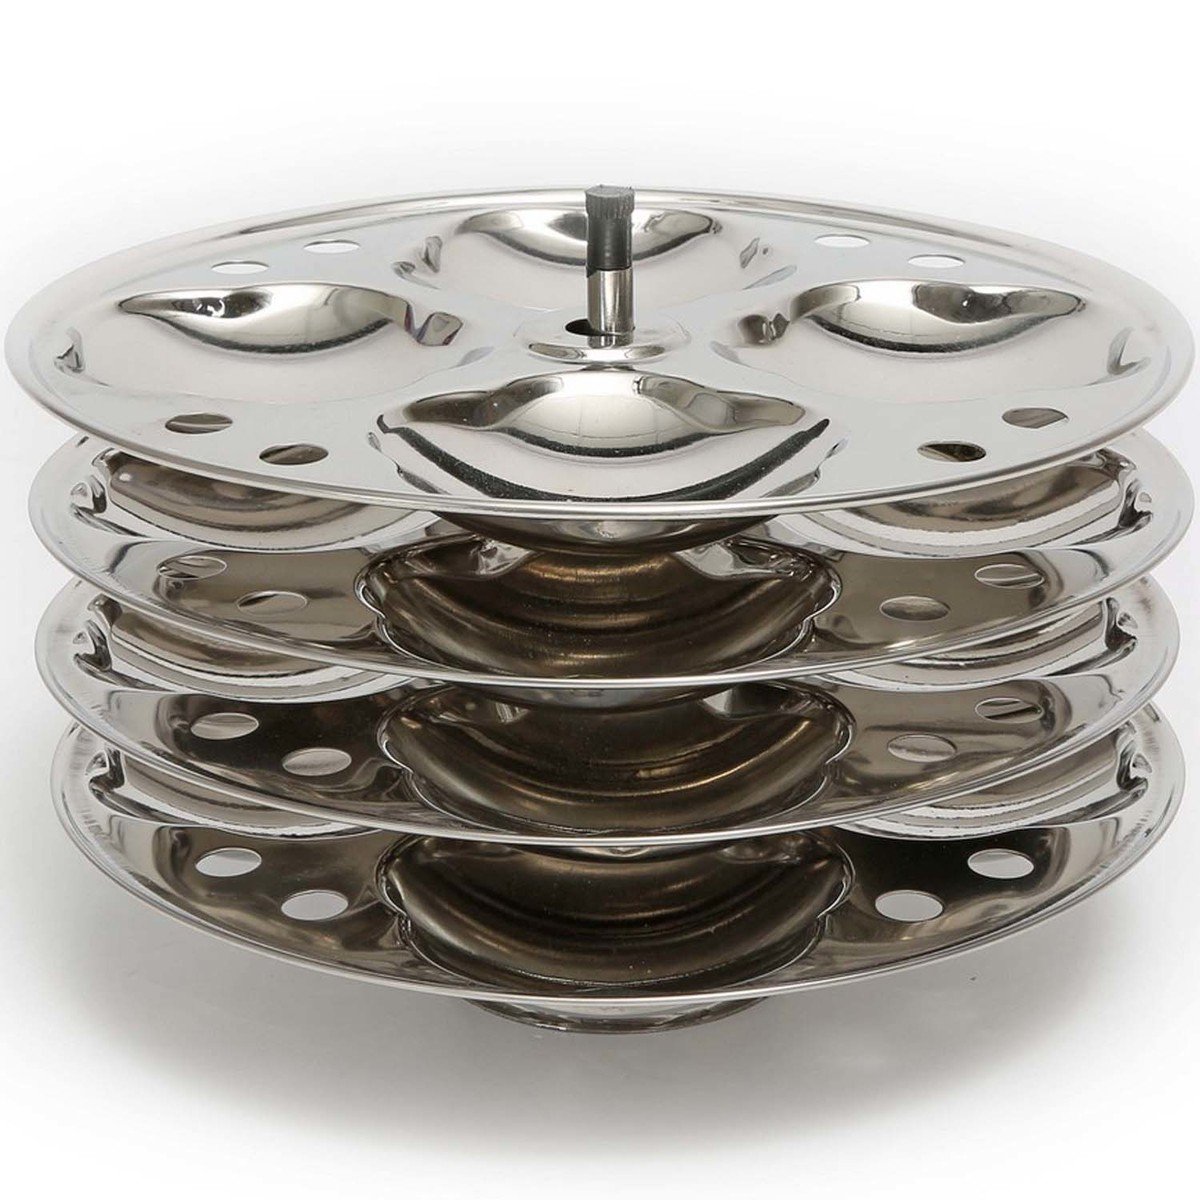 Chefline Stainless Steel Idly Stand Flower 4Plate